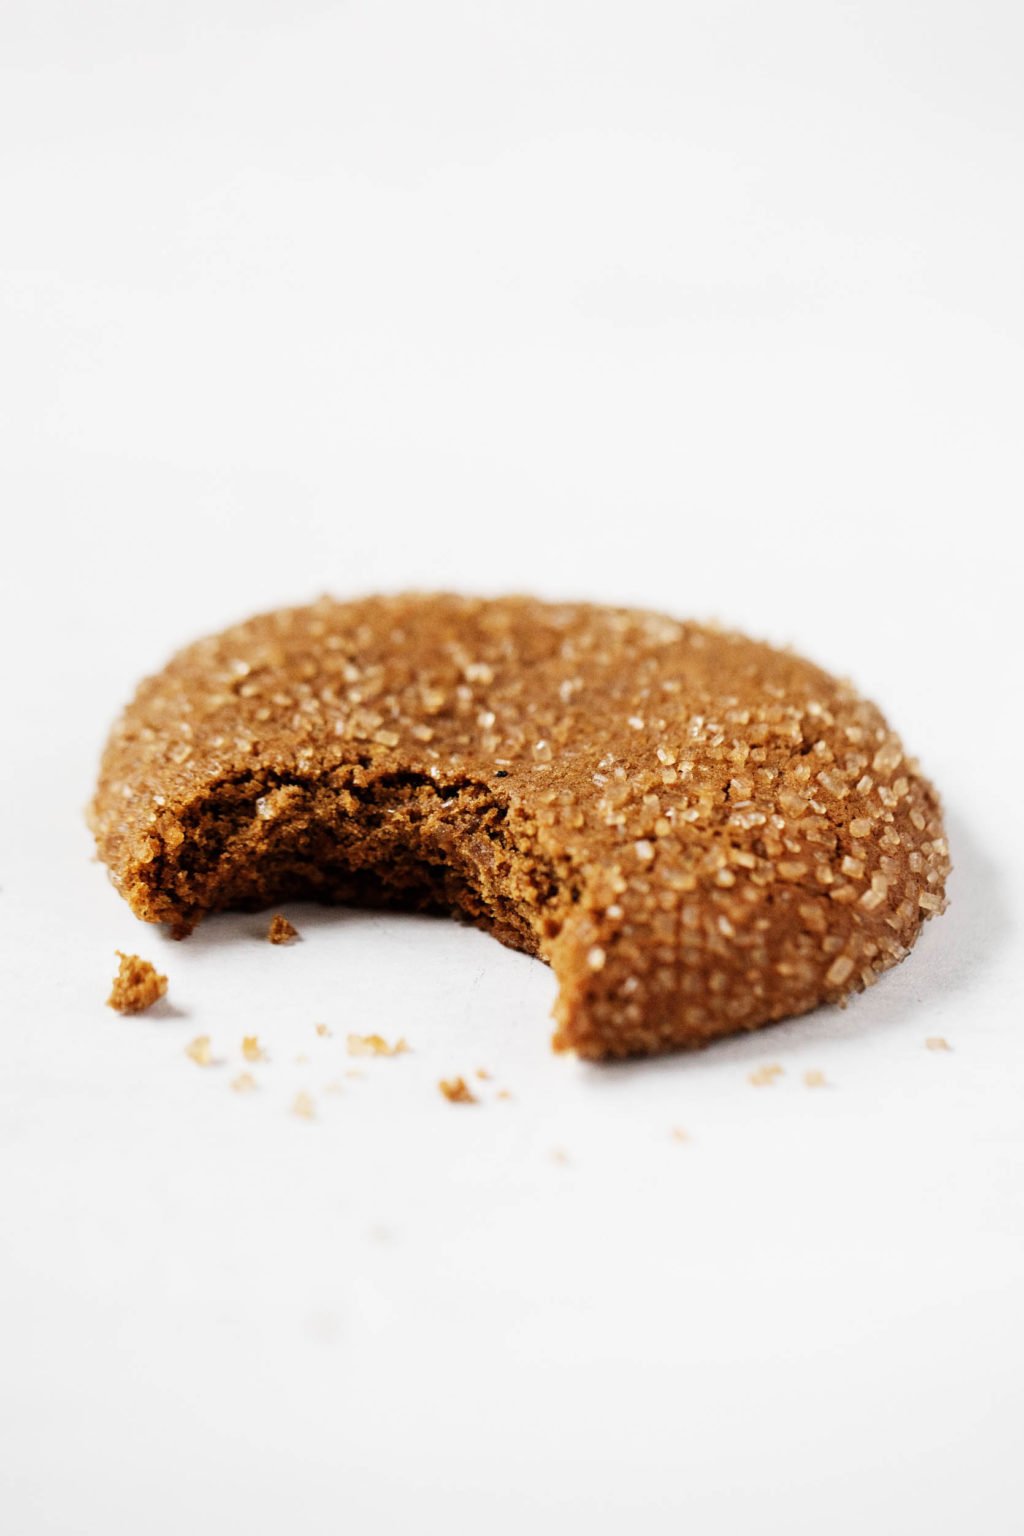 A single, ginger-spiced holiday cookie, just bitten into.